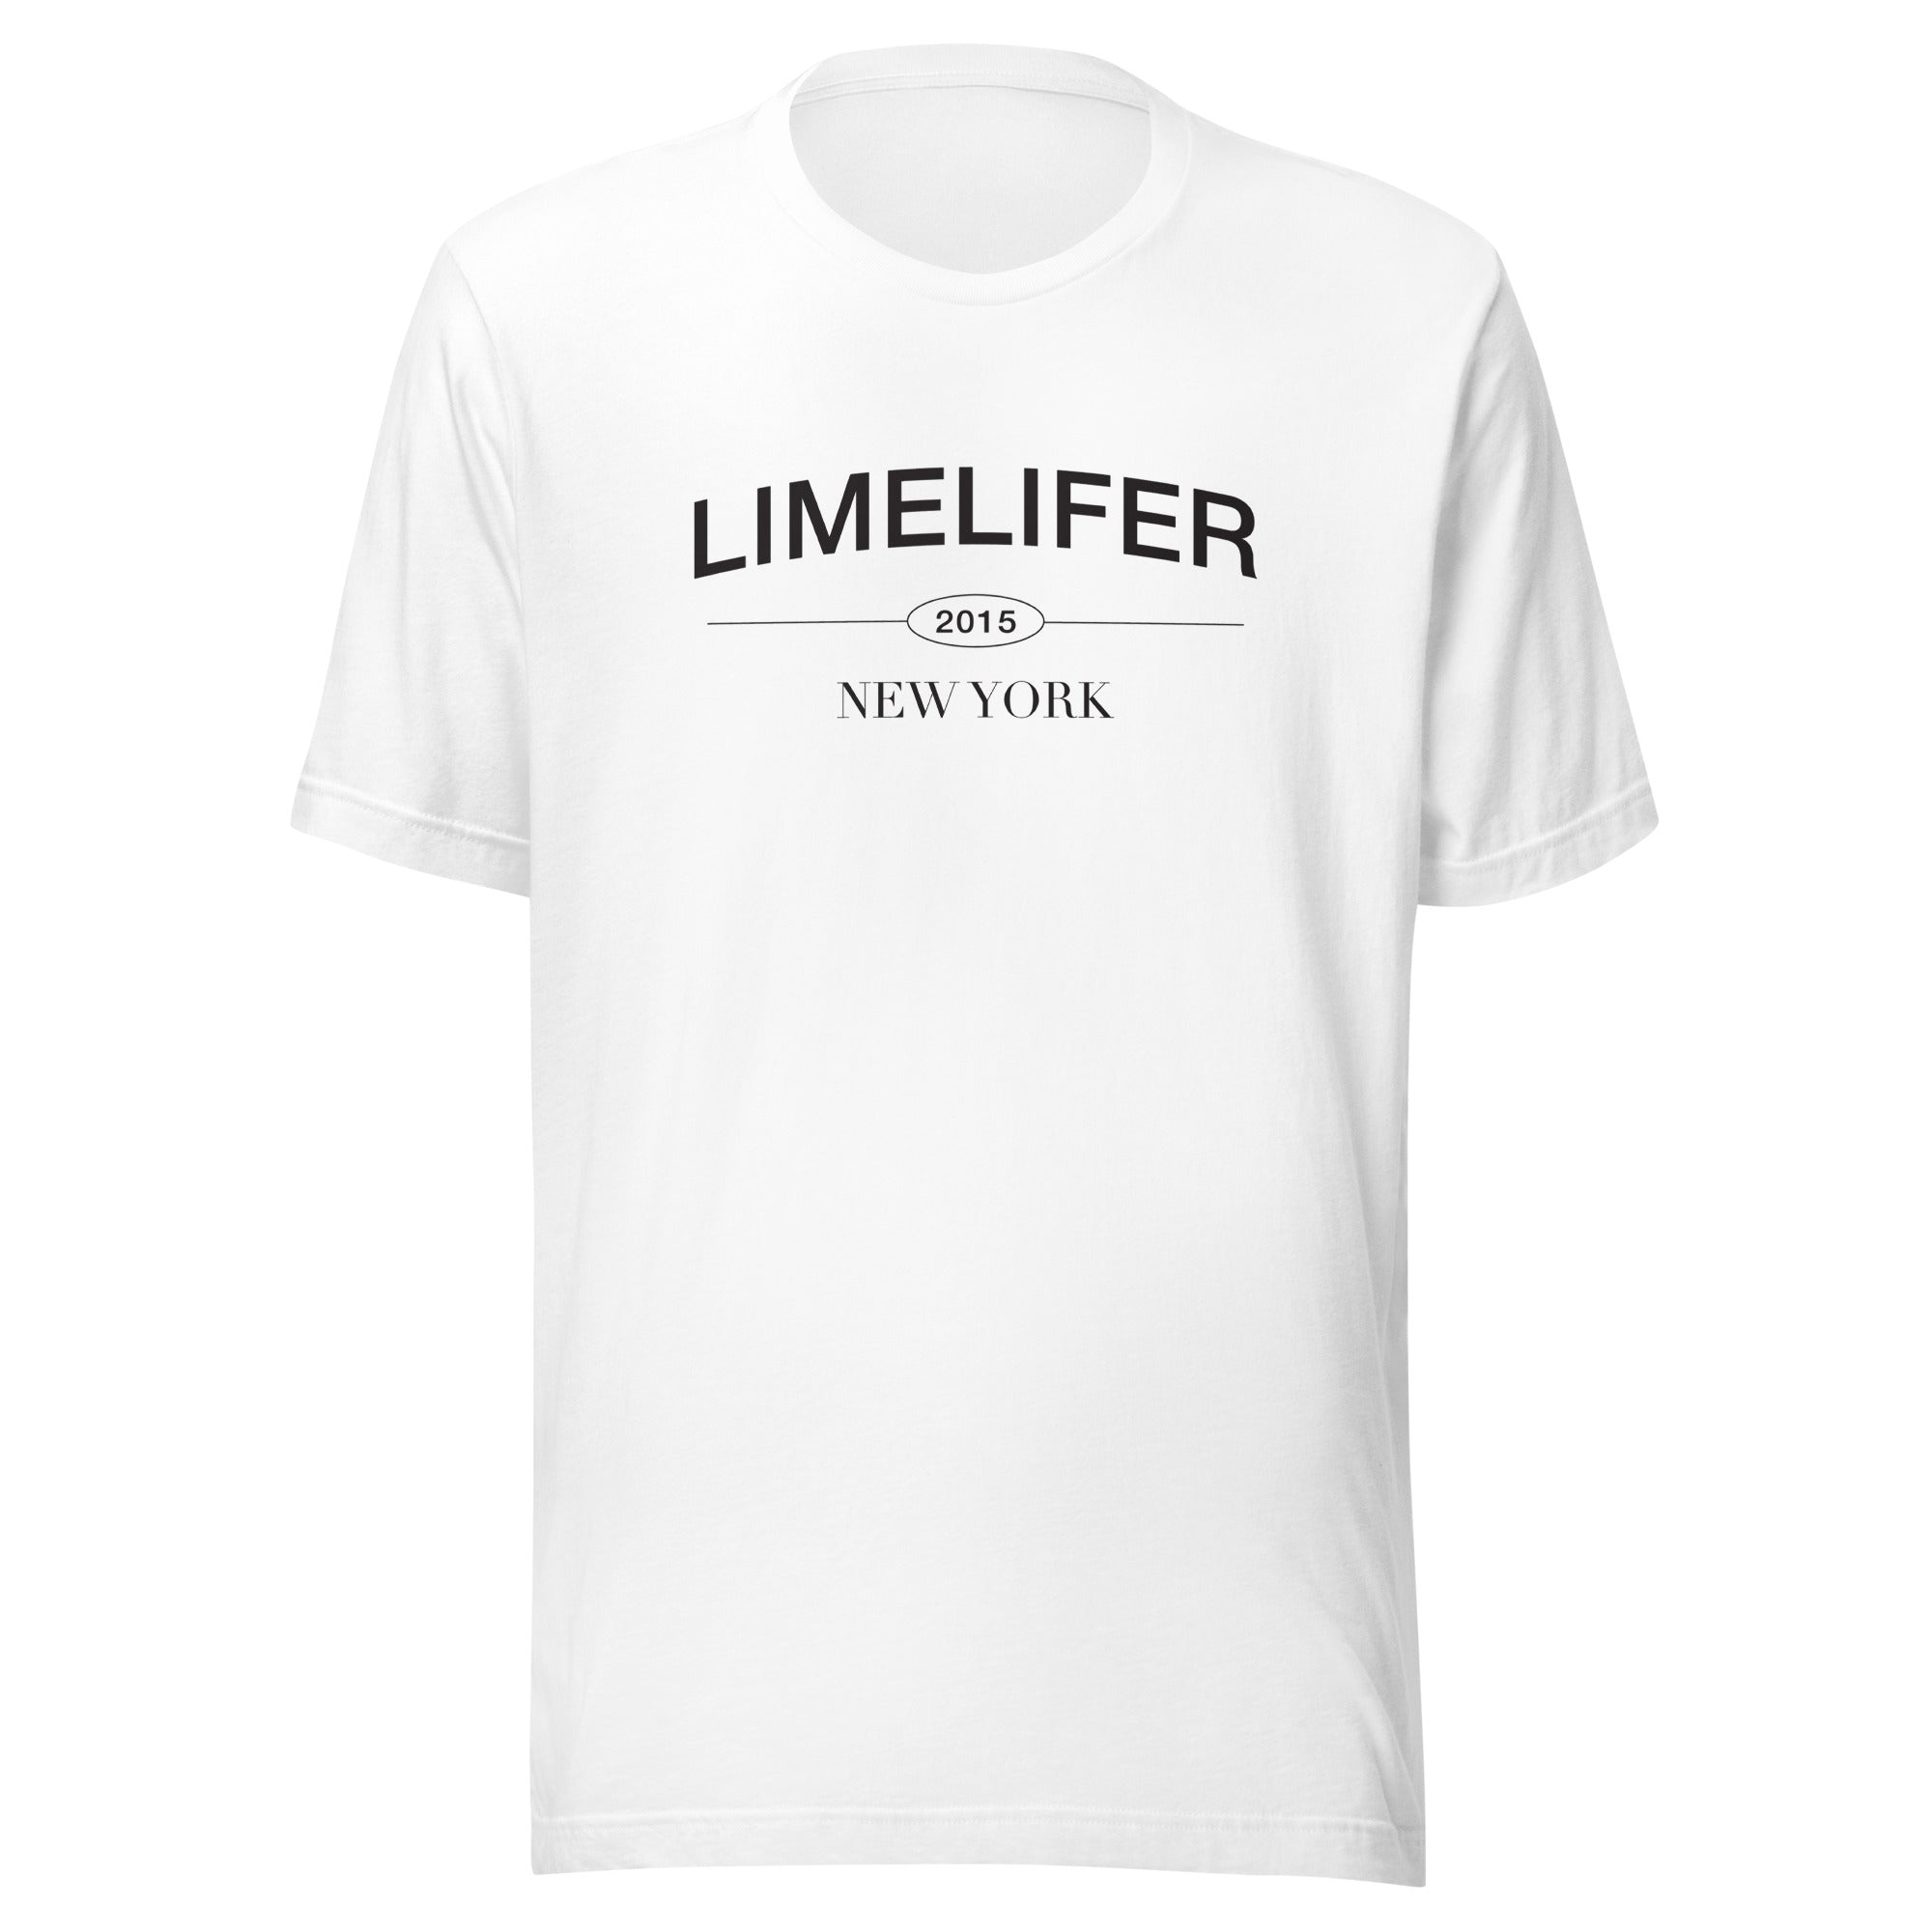 LIMELIFER NY - Unisex t-shirt in White, Athletic Heather and Light Blue